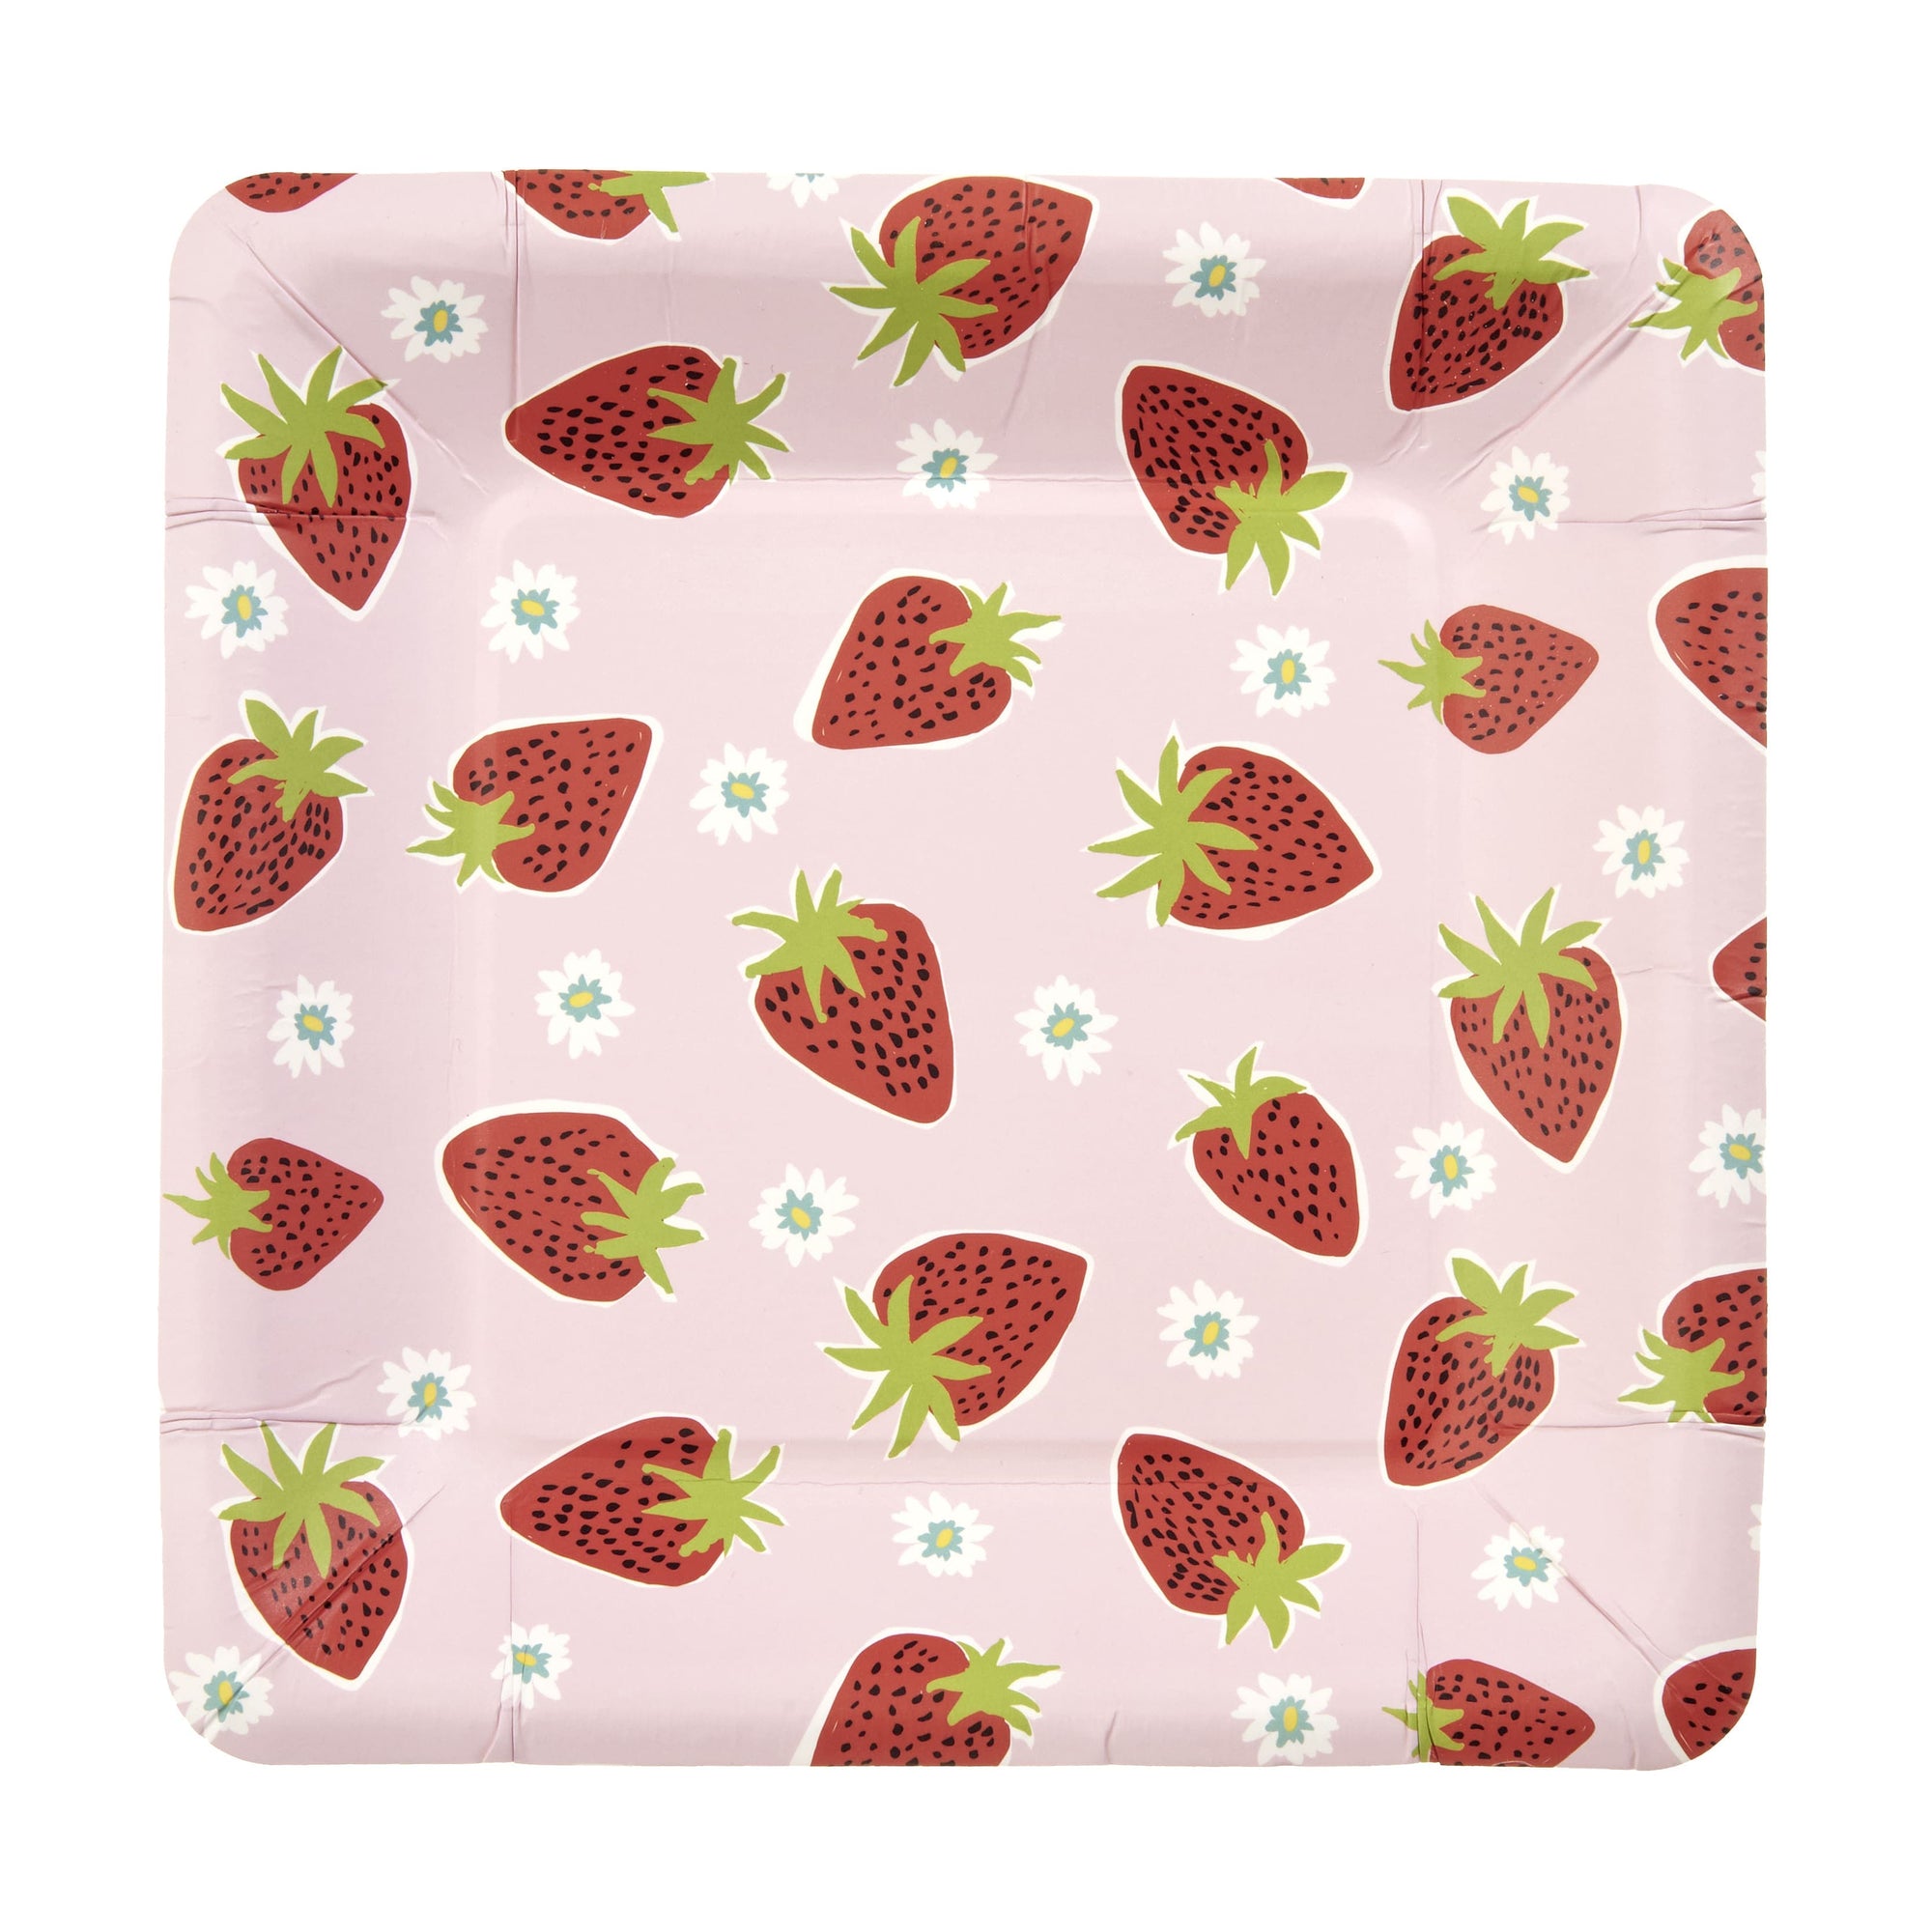 Strawberry Snack Plate - 16 Count Roobee Plates + Dishes 93061